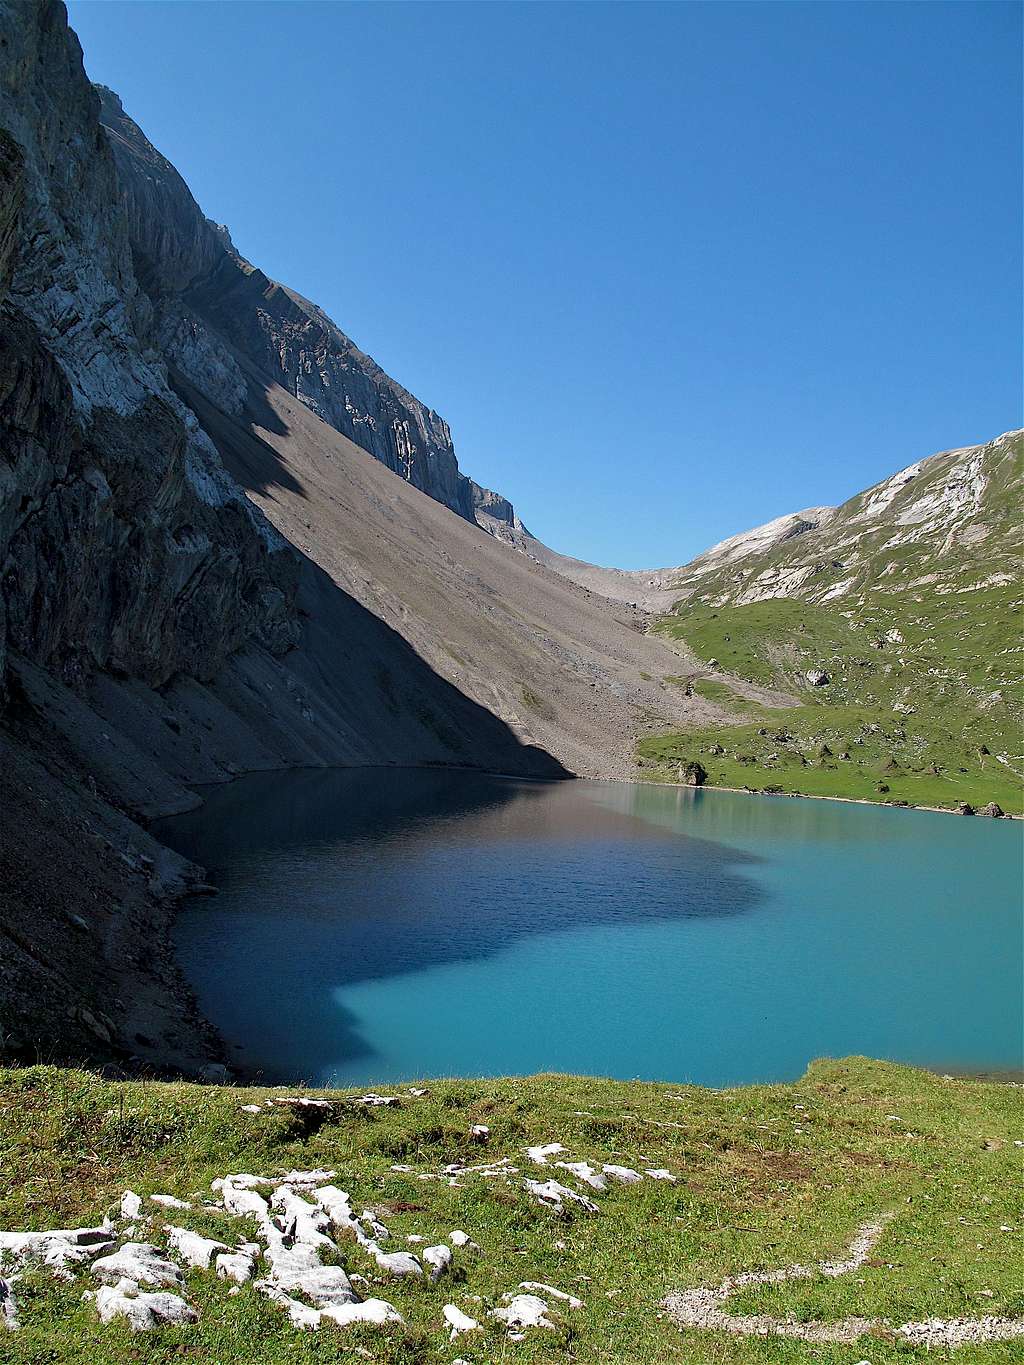 Iffigsee lake and Schnidejoch pass (2756m)